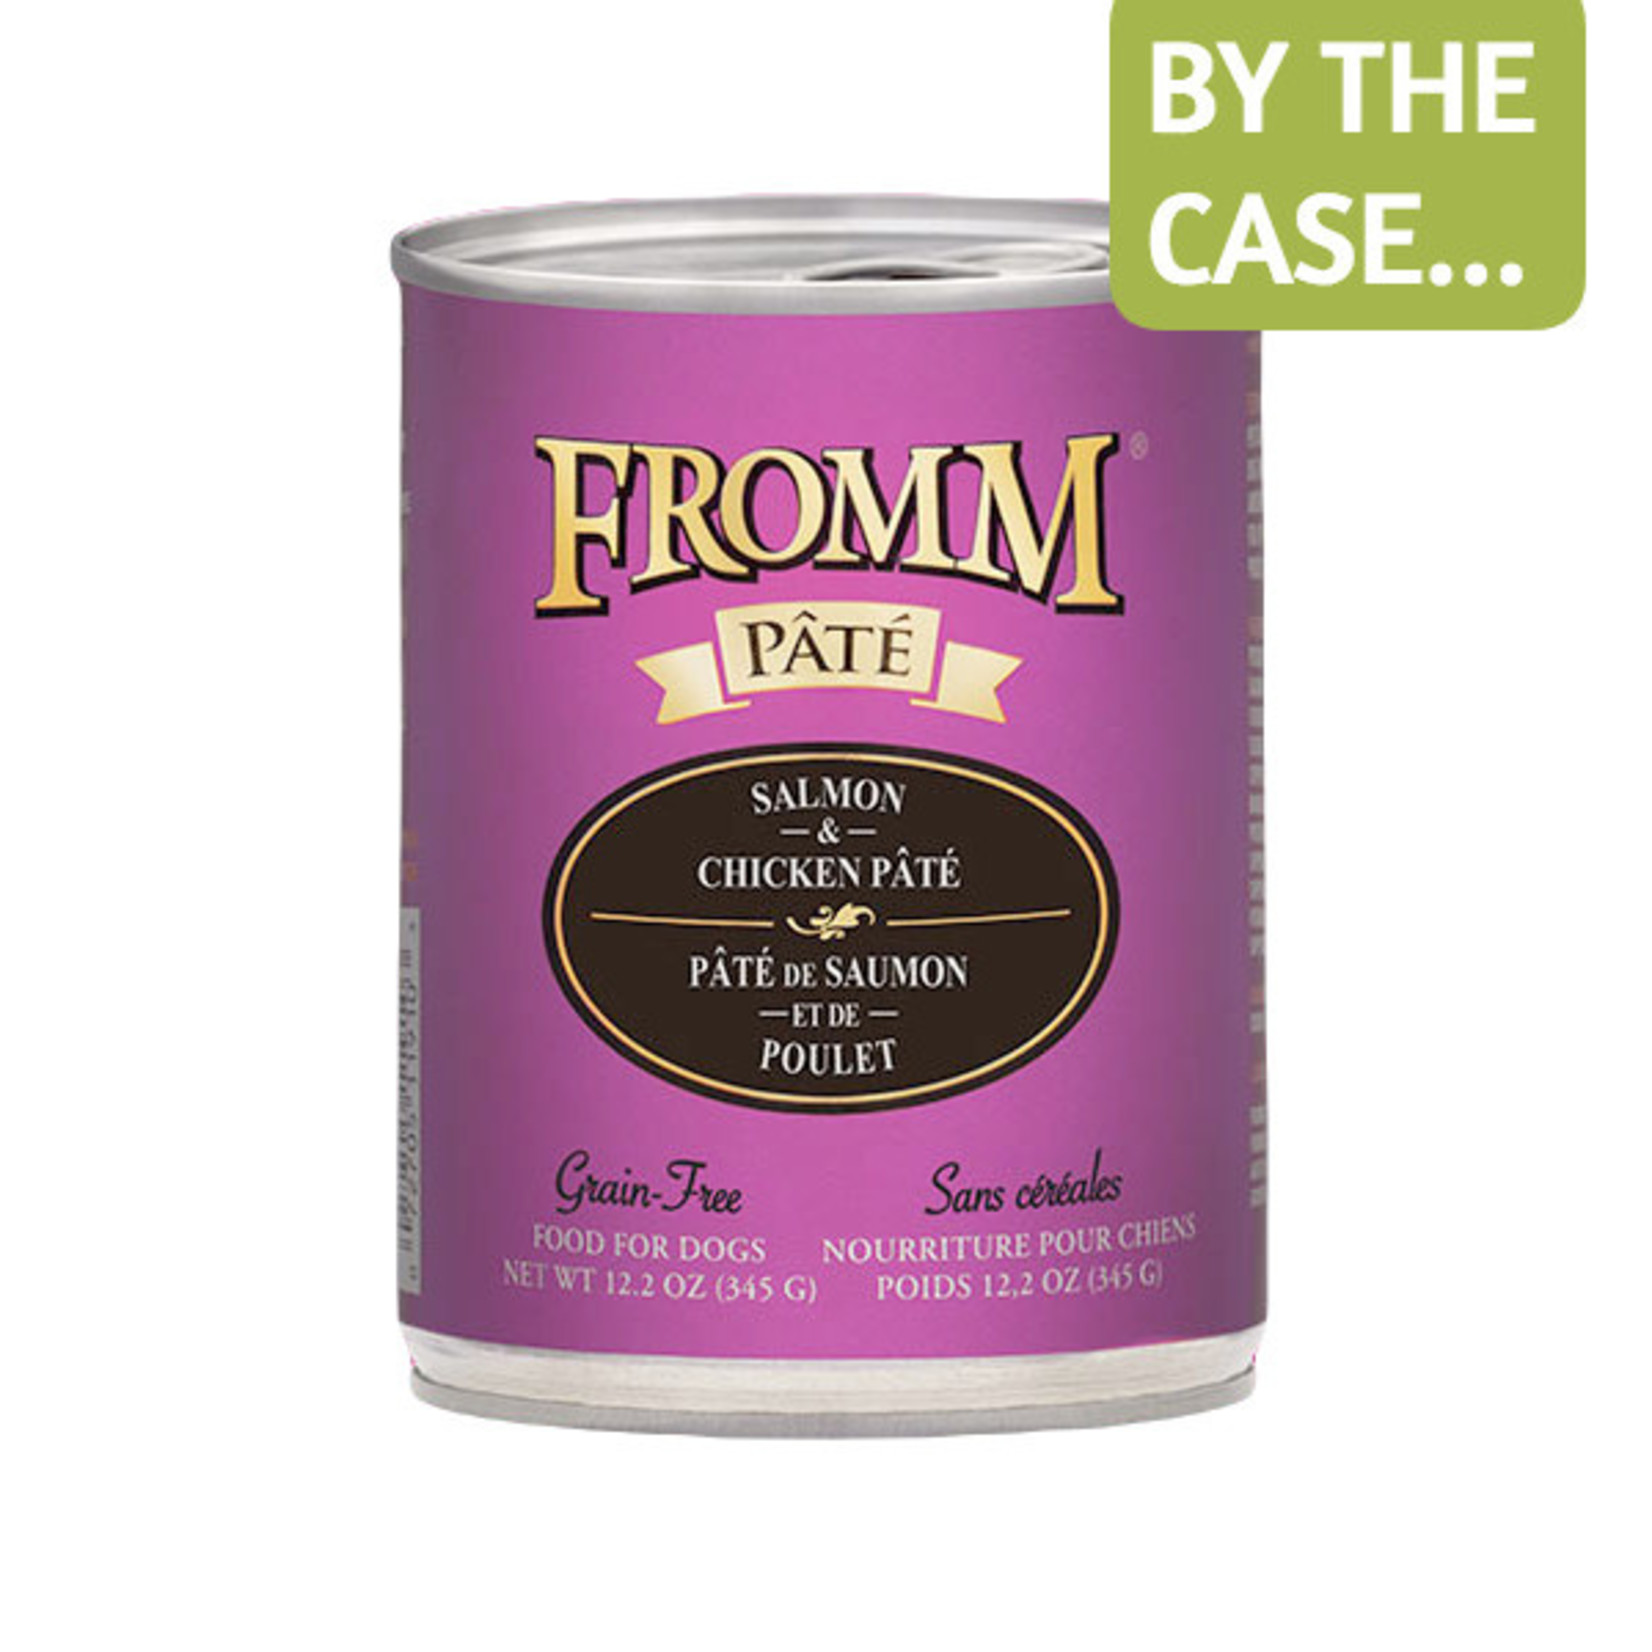 Fromm Fromm Wet Dog Food Salmon & Chicken Pate 12.2oz Can Grain Free